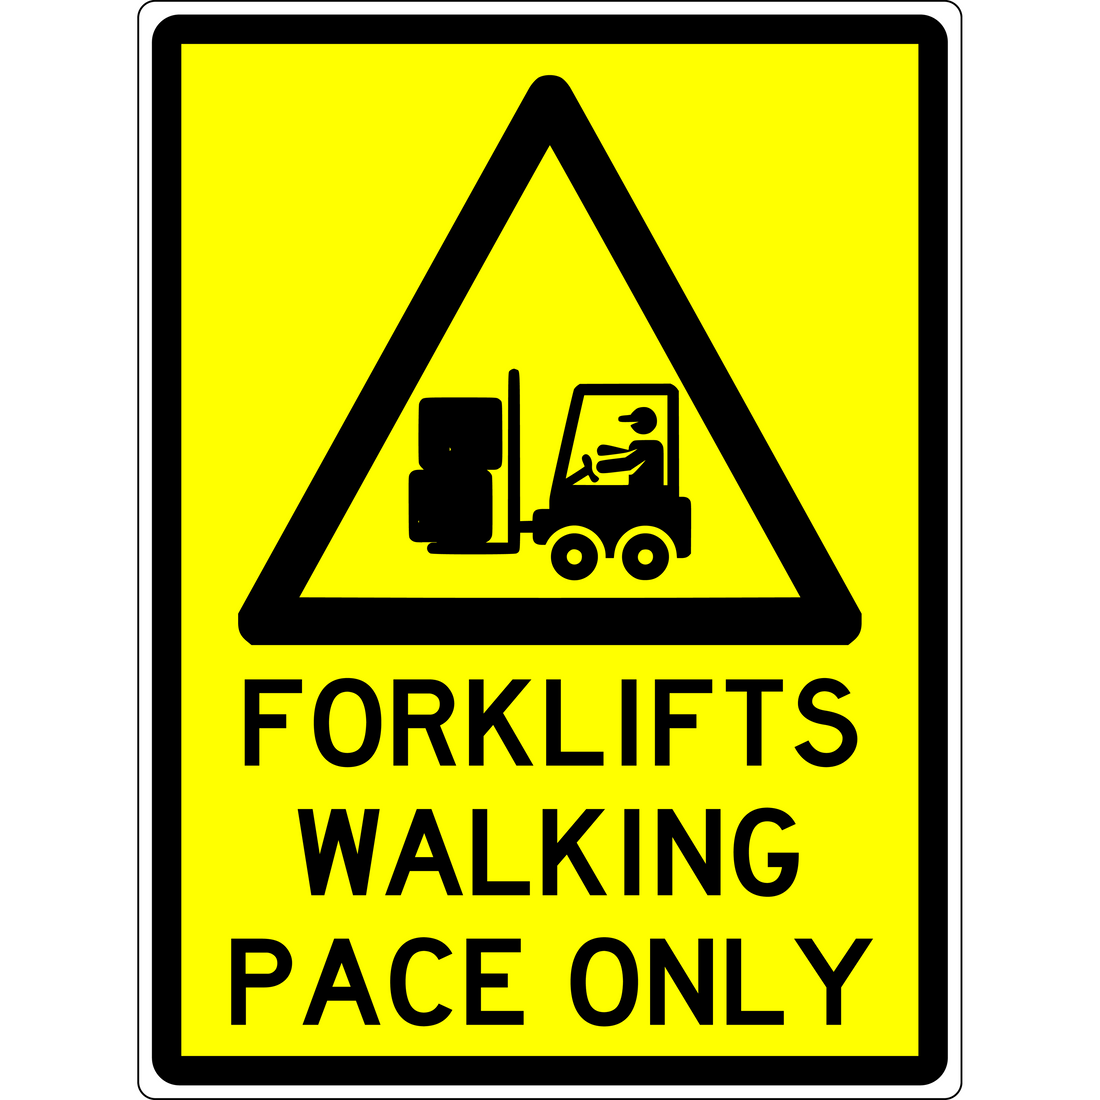 WARNING-FORKLIFTS-WALKING-PACE-ONLY